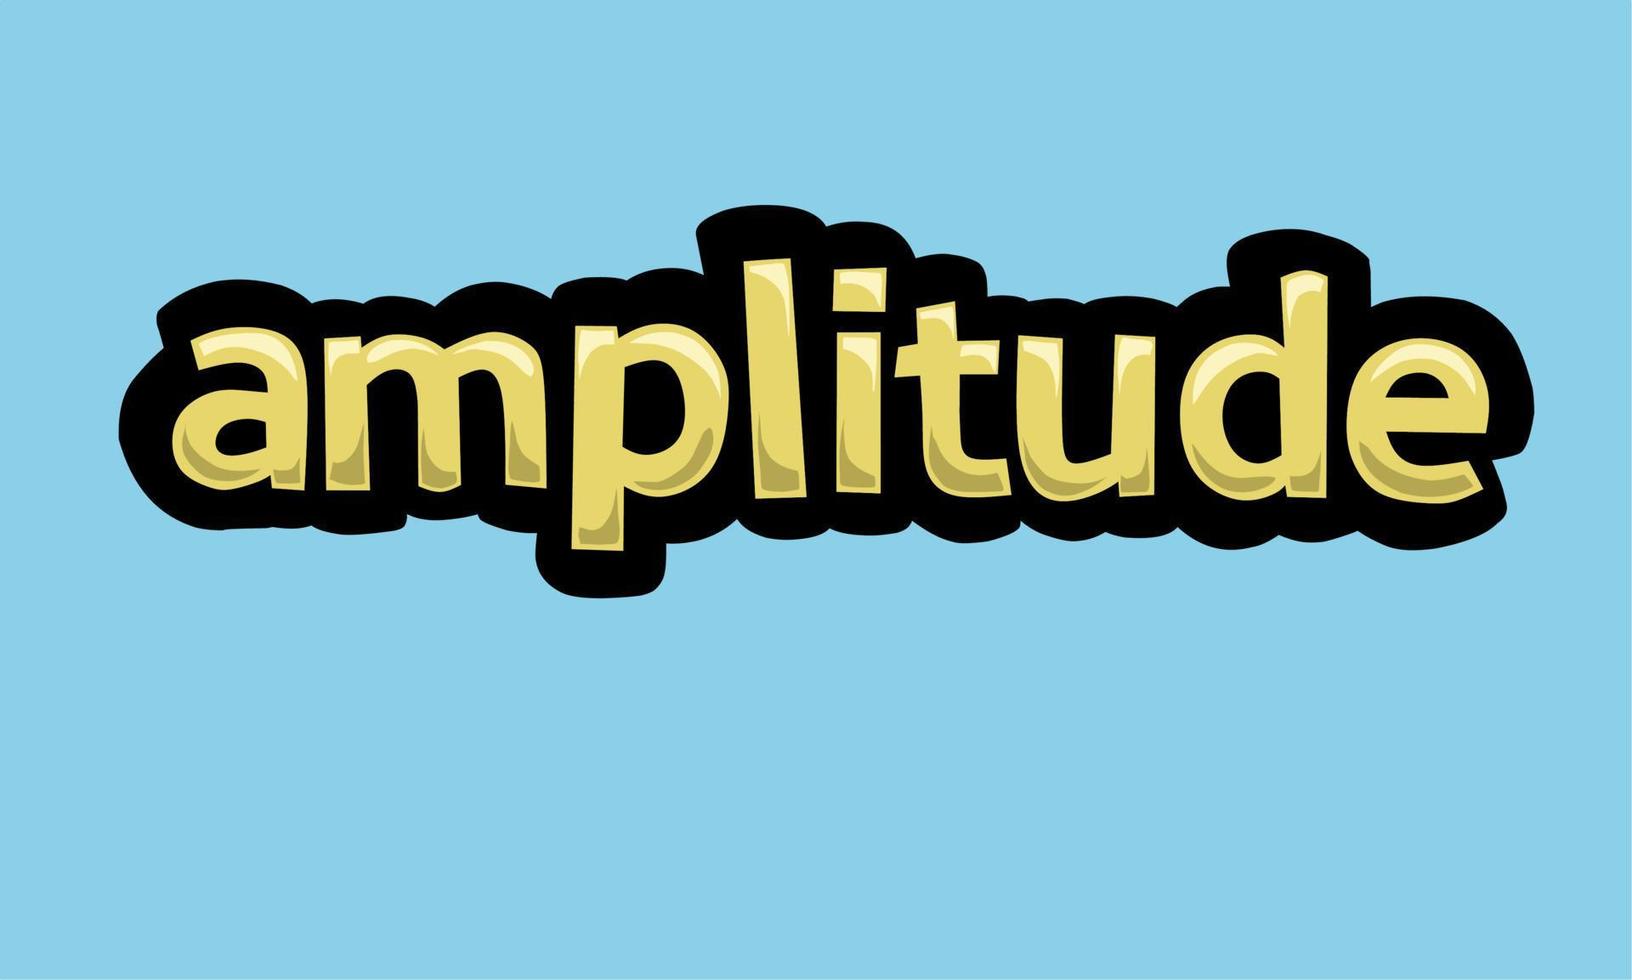 AMPLITUDE writing vector design on a blue background